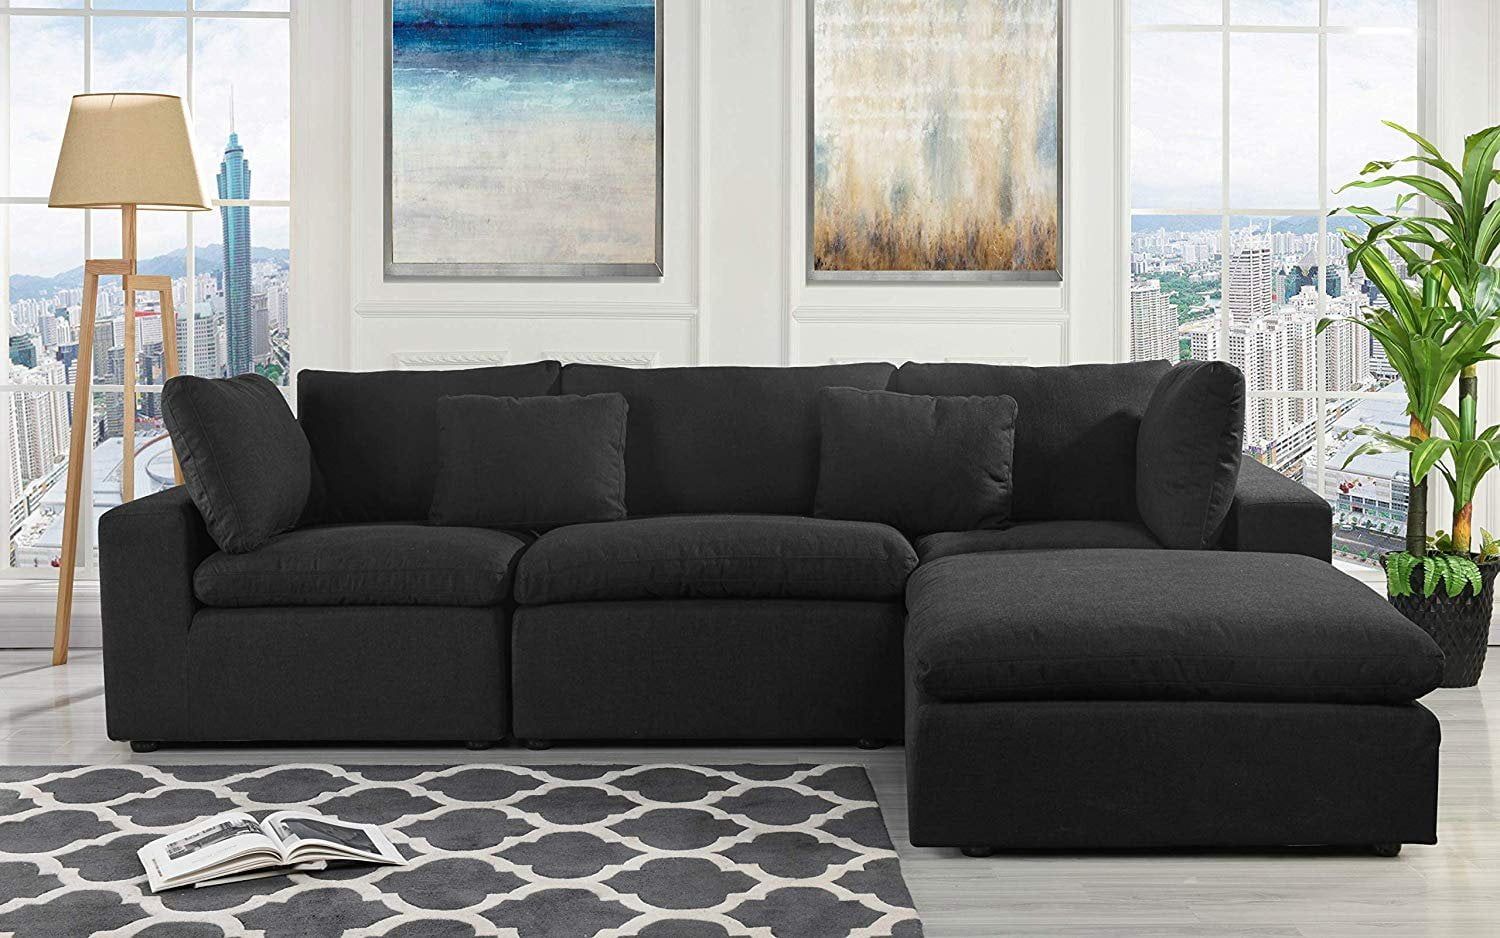 Classic Large Linen Fabric Sectional Sofa, L Shape Couch With Wide With 3 Seat L Shaped Sofas In Black (View 4 of 20)